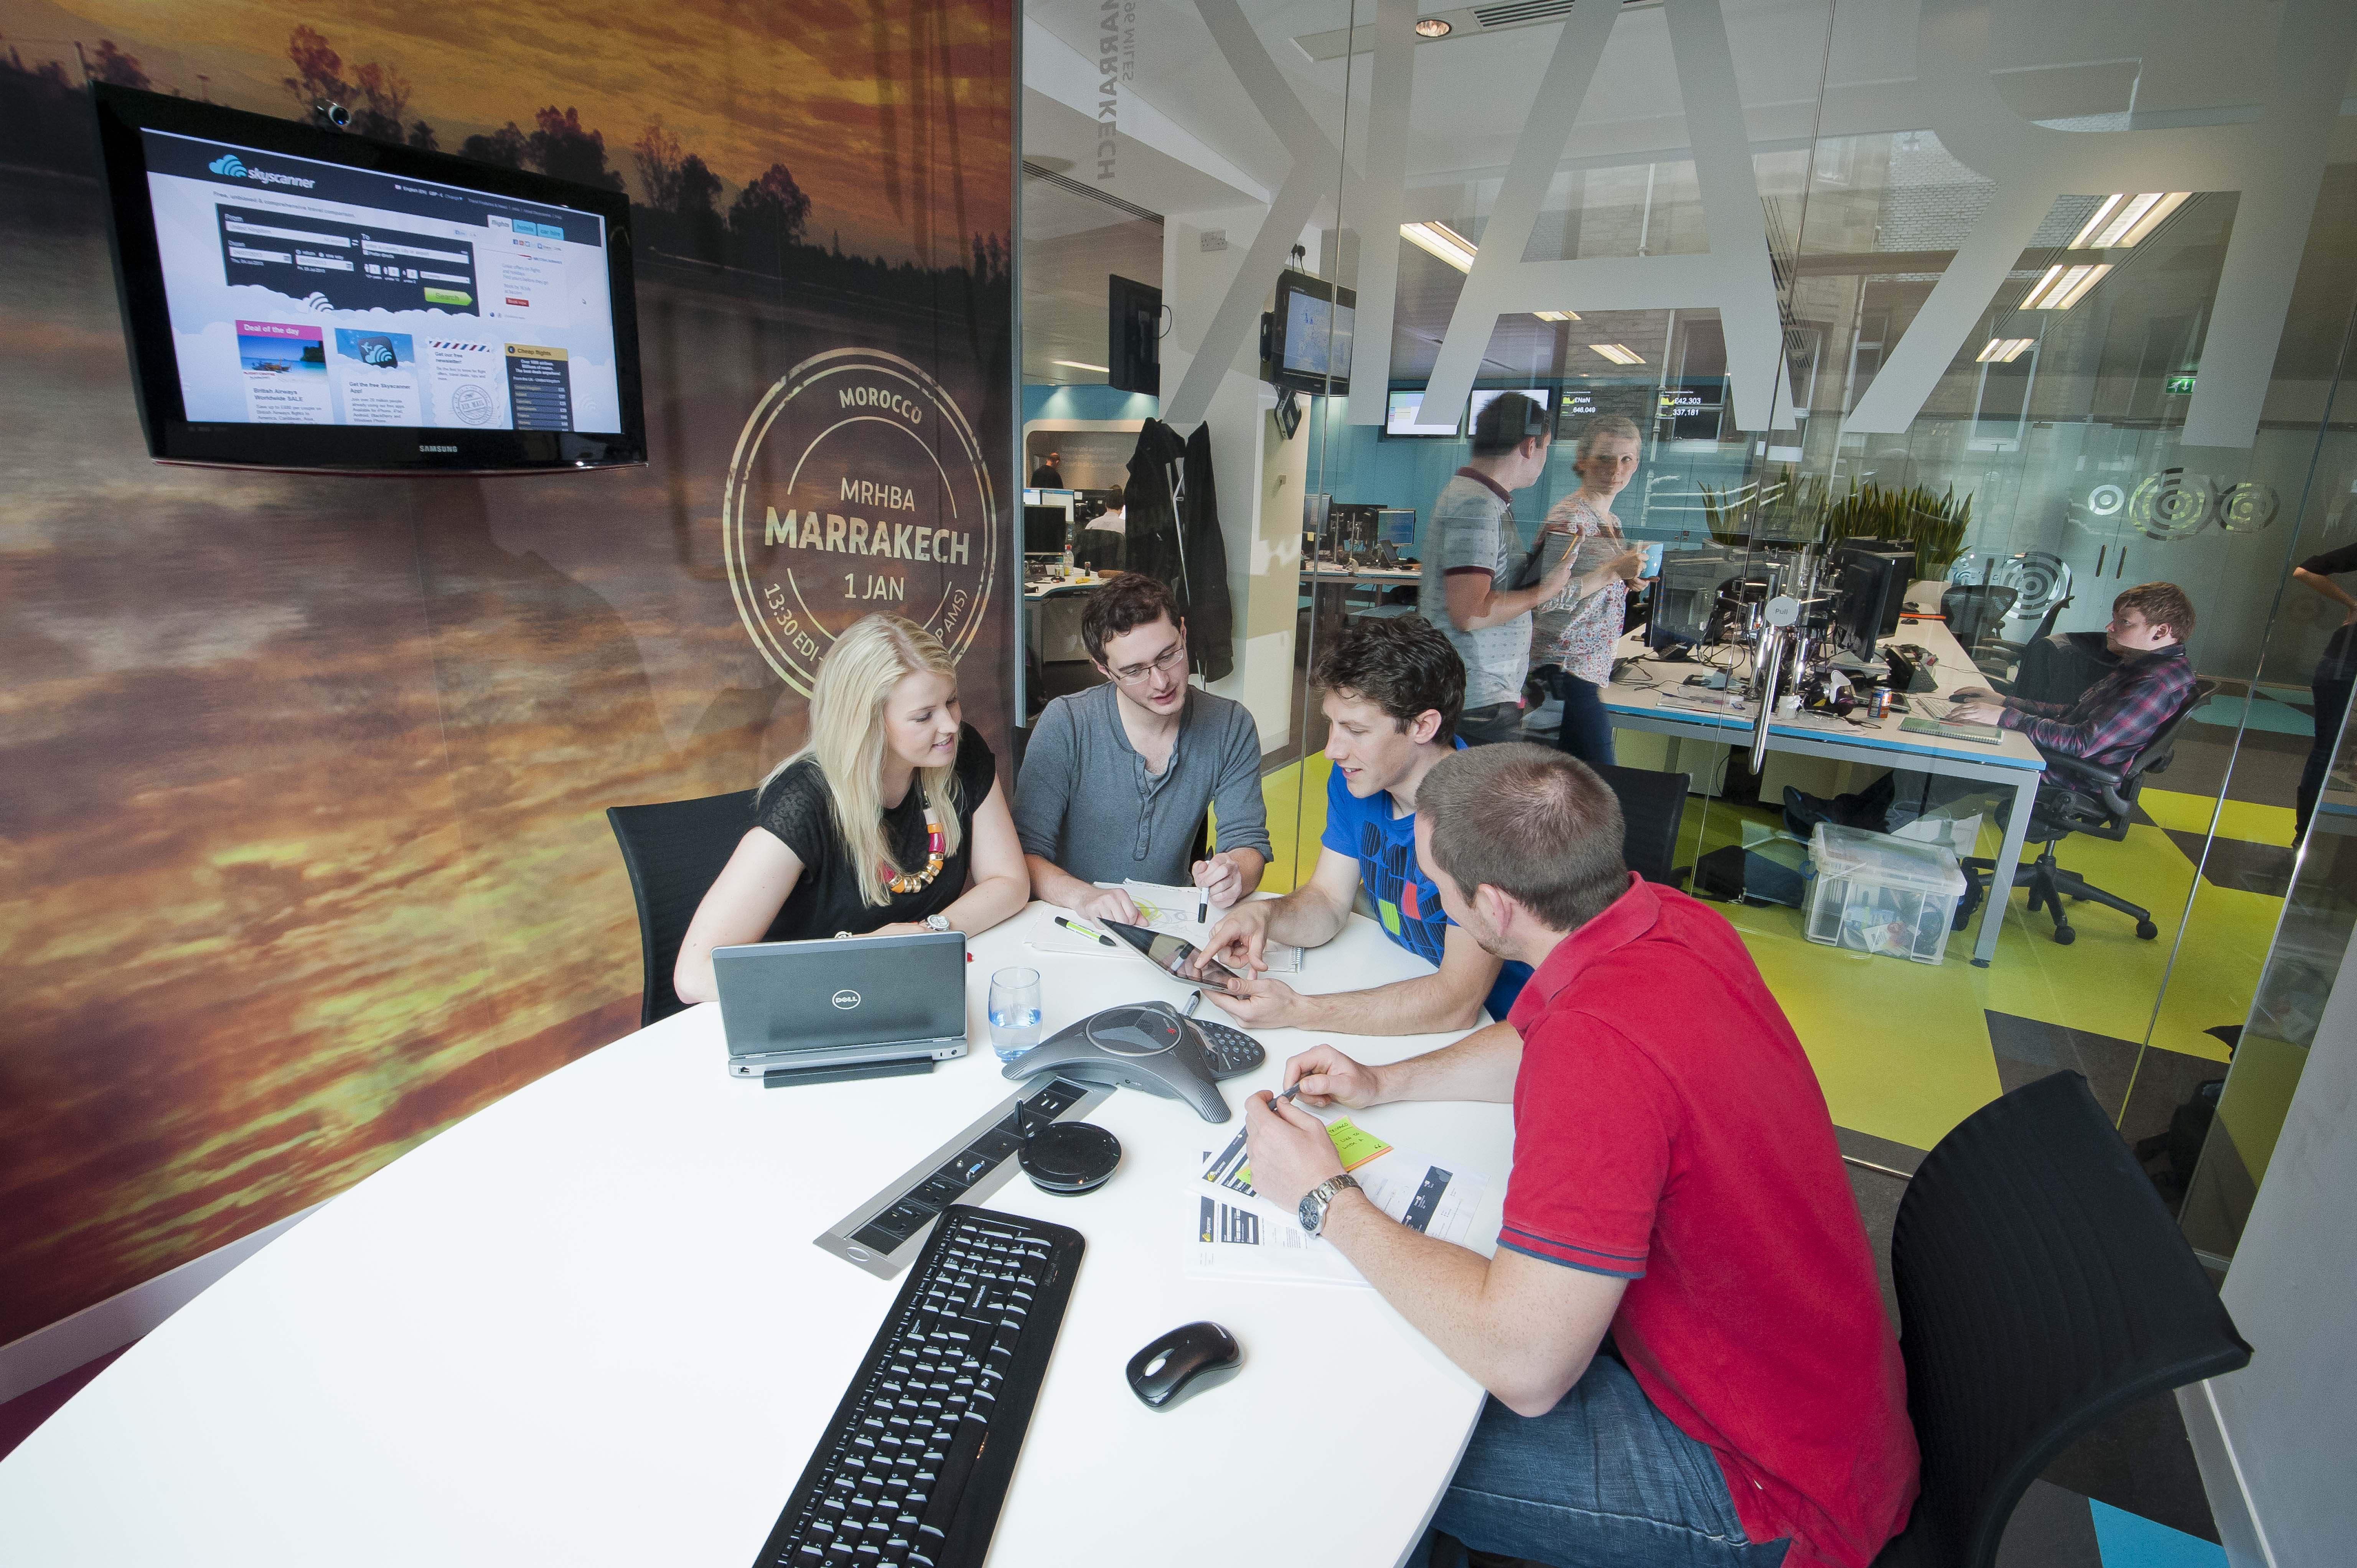 Meeting rooms at Skyscanner are themed by destinations